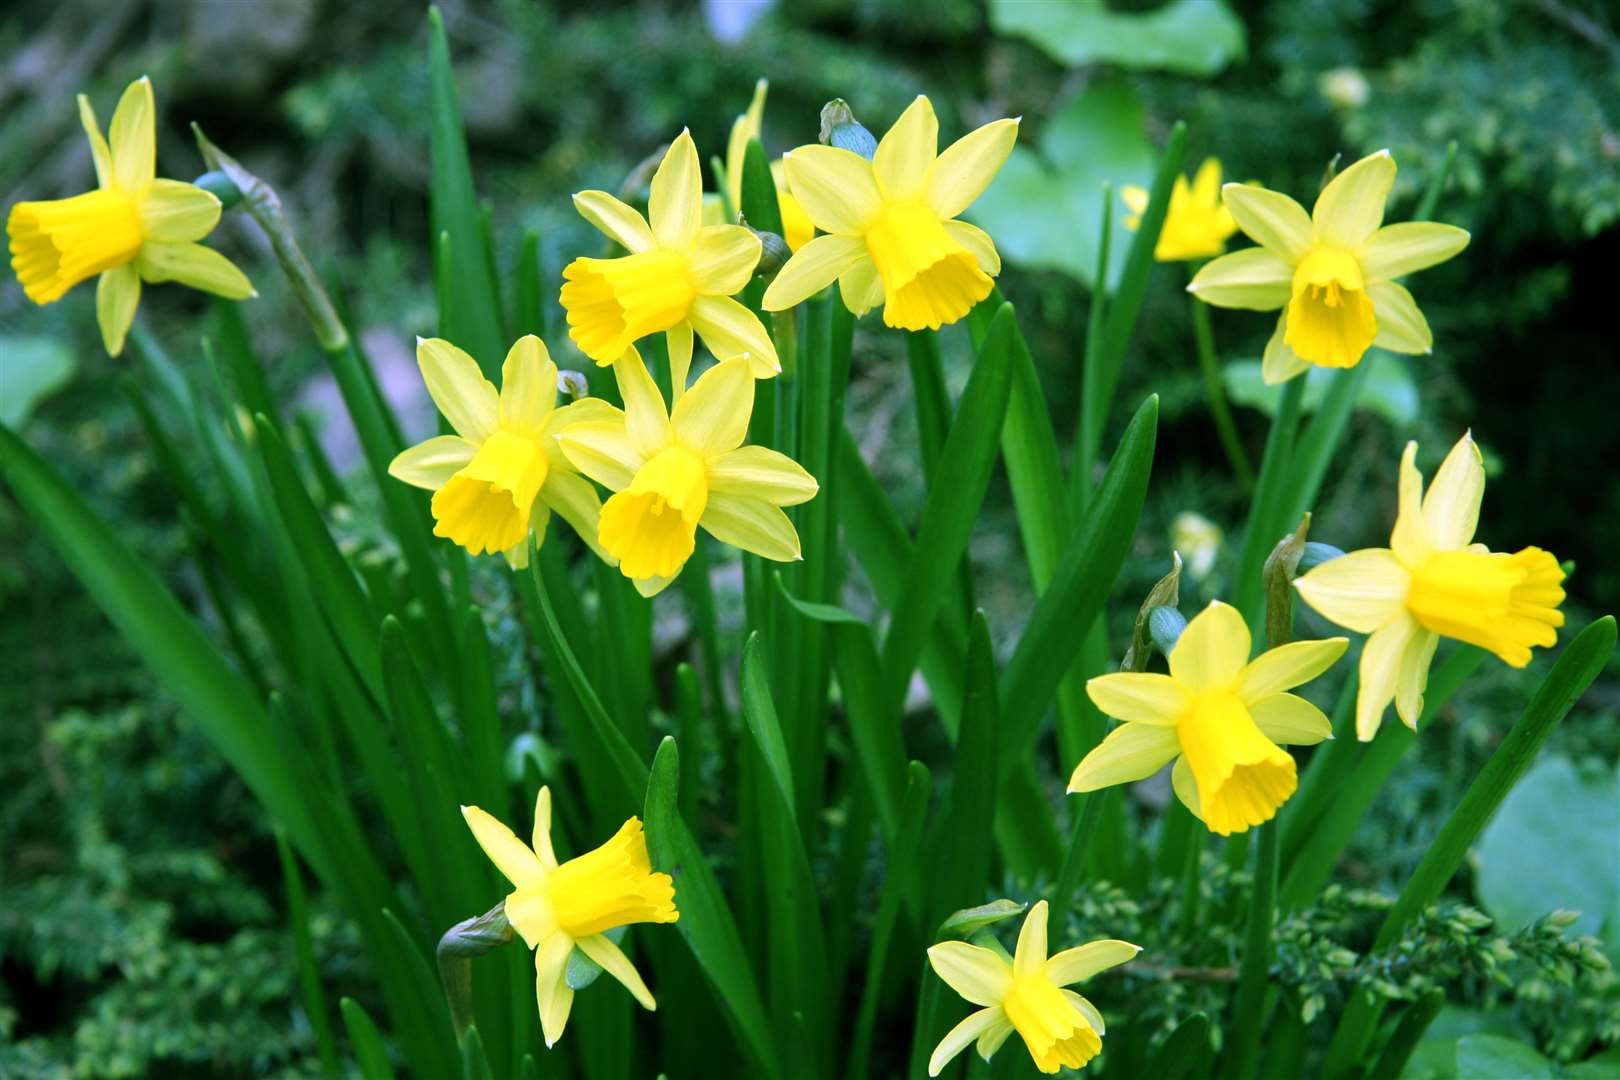 A chemical called haemanthamine extracted from daffodils could held reduce methane emissions.